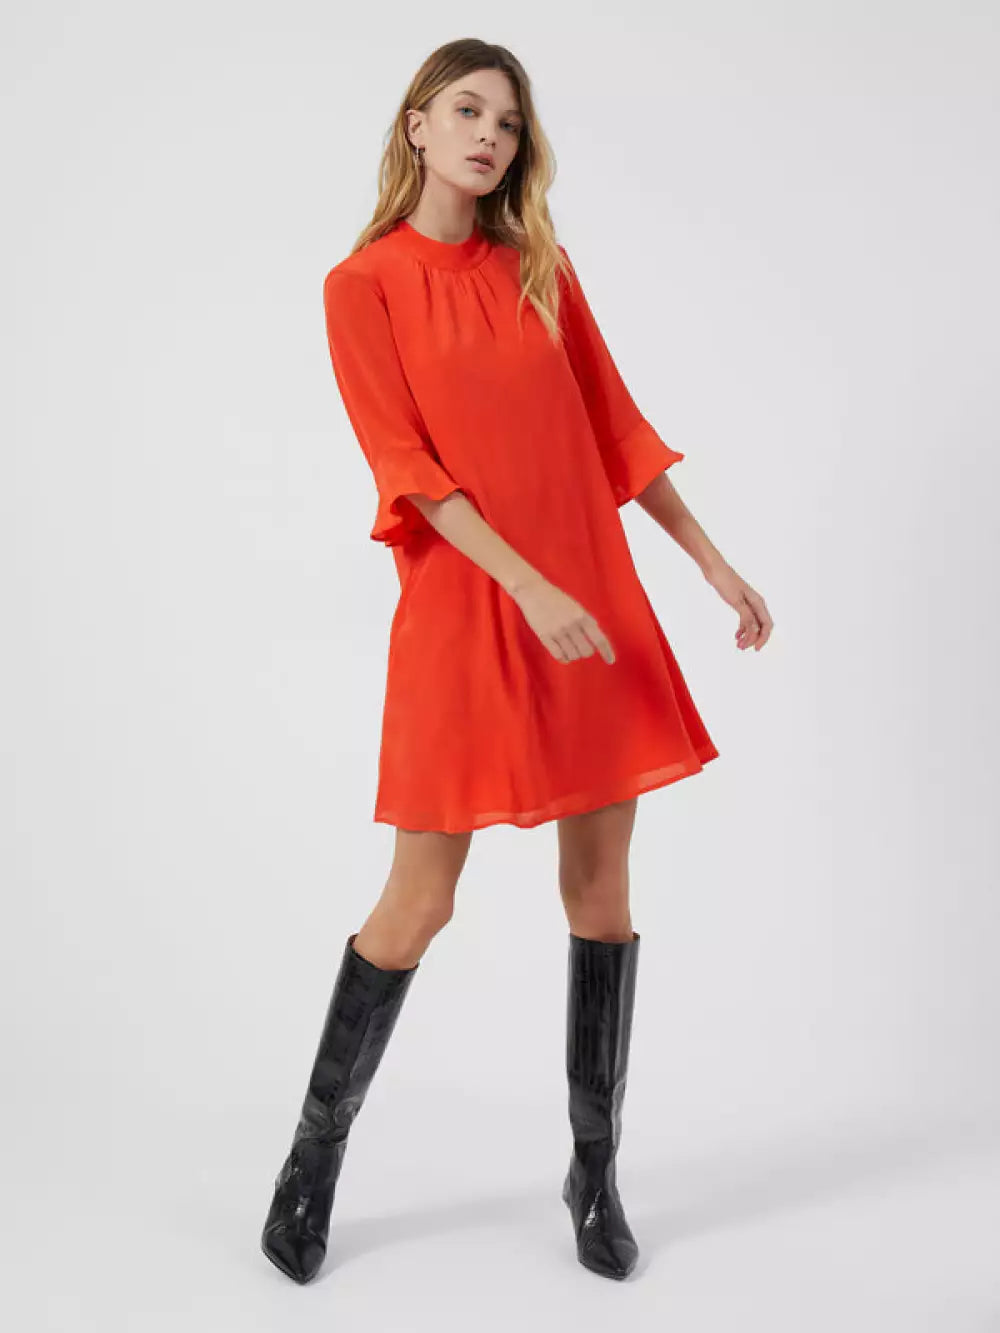 French Connection Evangeline Aracia Cupro Smock Dress product image